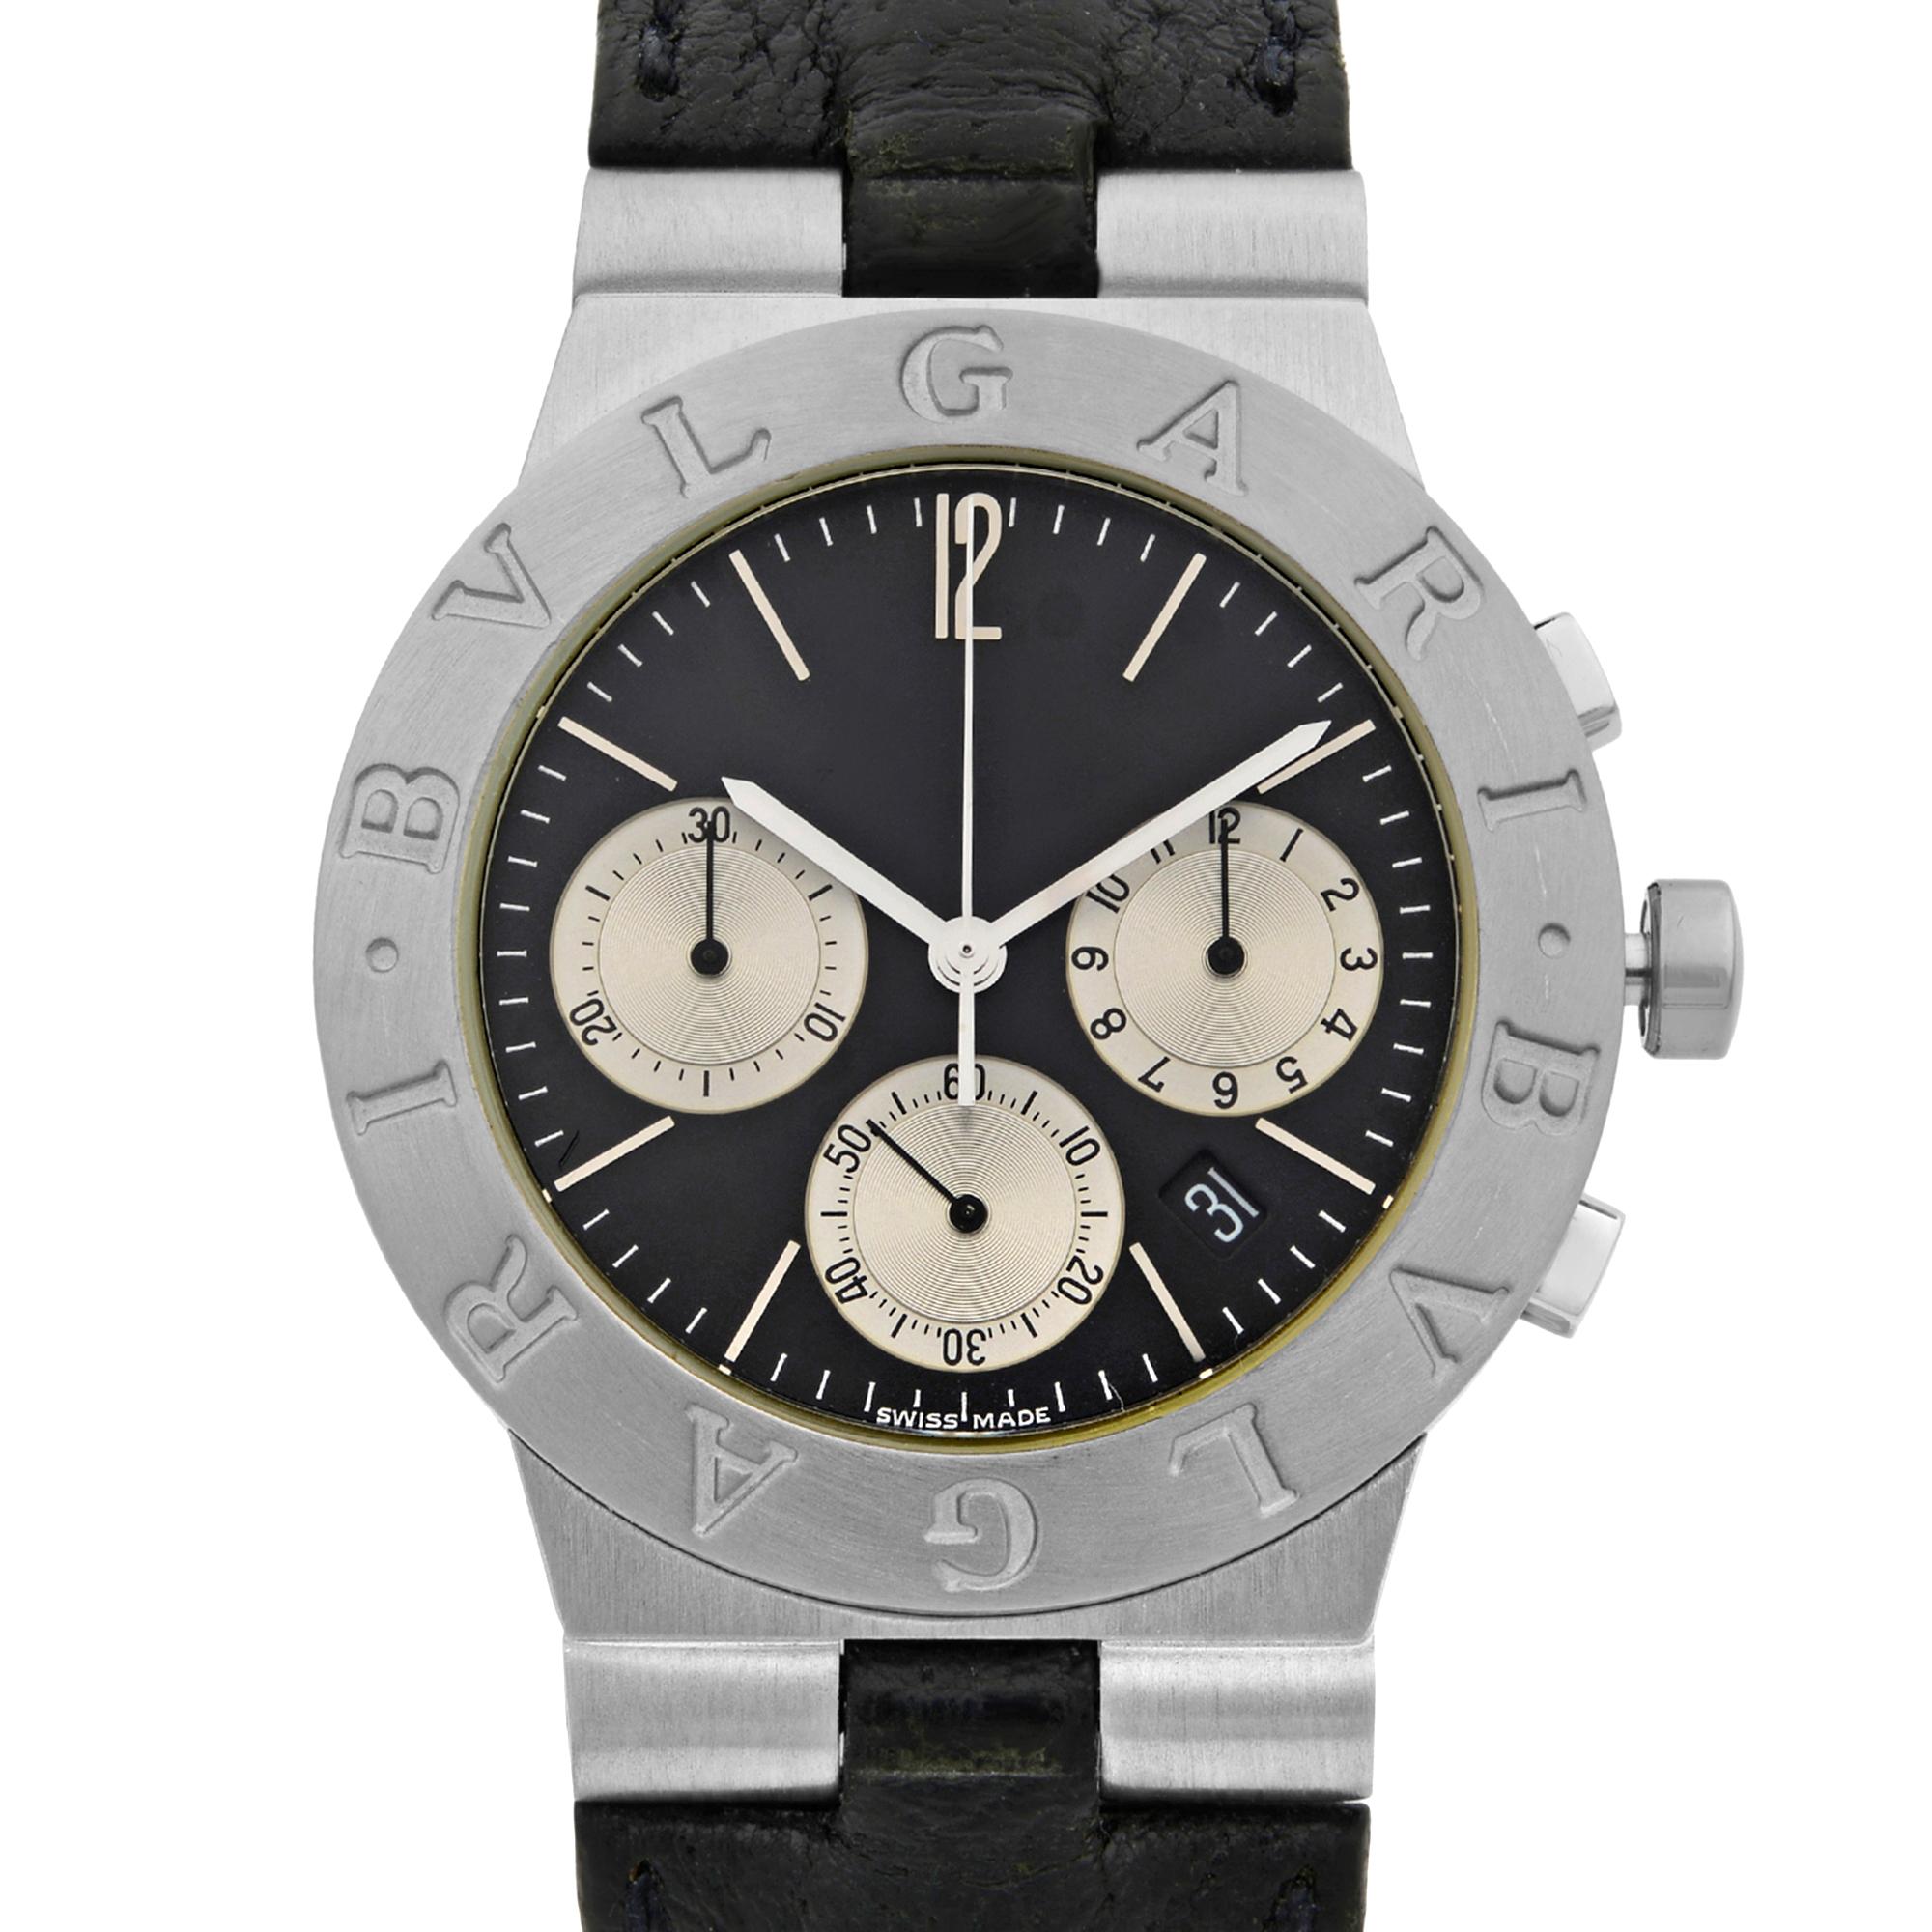 This pre-owned Bvlgari Diagono  CHW35G is a beautiful men's timepiece that is powered by quartz (battery) movement which is cased in a white gold case. It has a round shape face, chronograph, date indicator, small seconds subdial dial and has hand